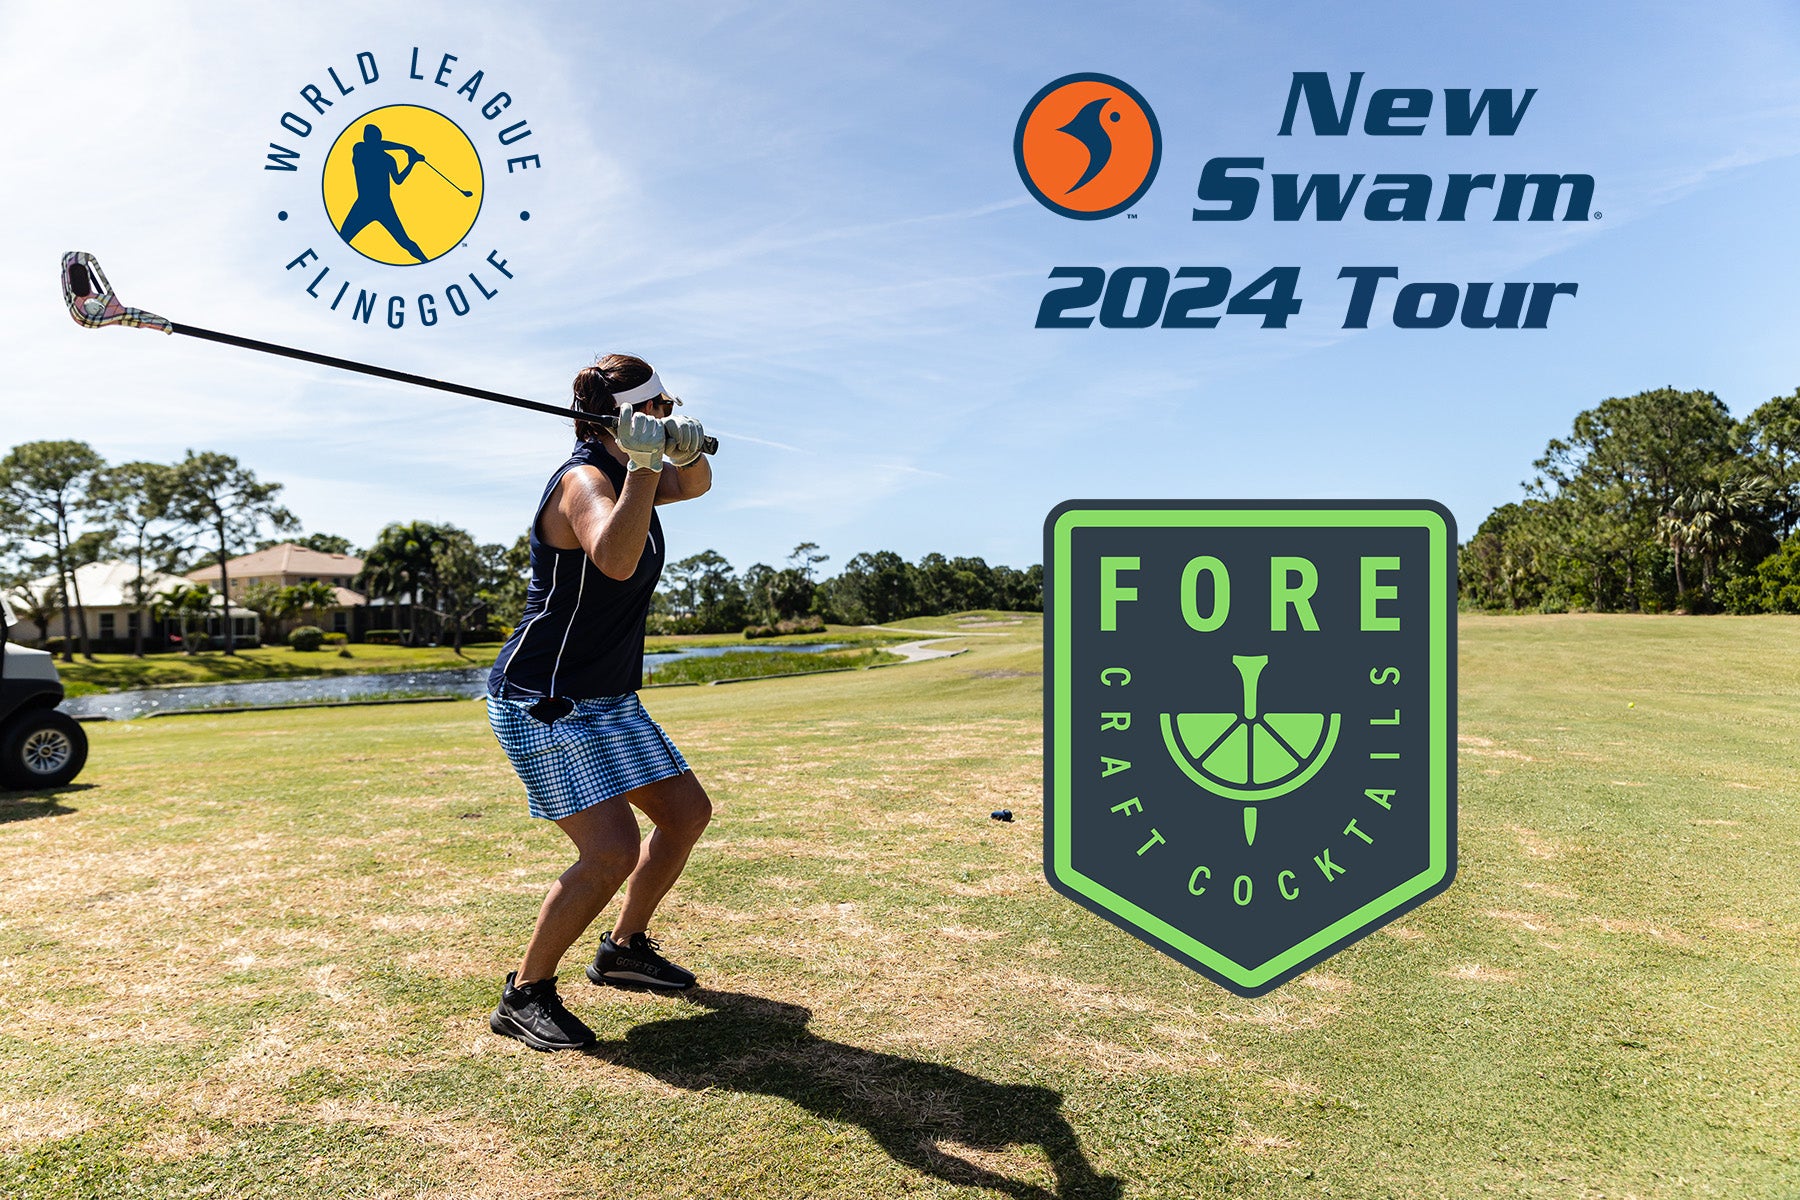 Fore Craft Becomes the Official Canned Cocktail of World League FlingGolf's 2024 New Swarm Tour